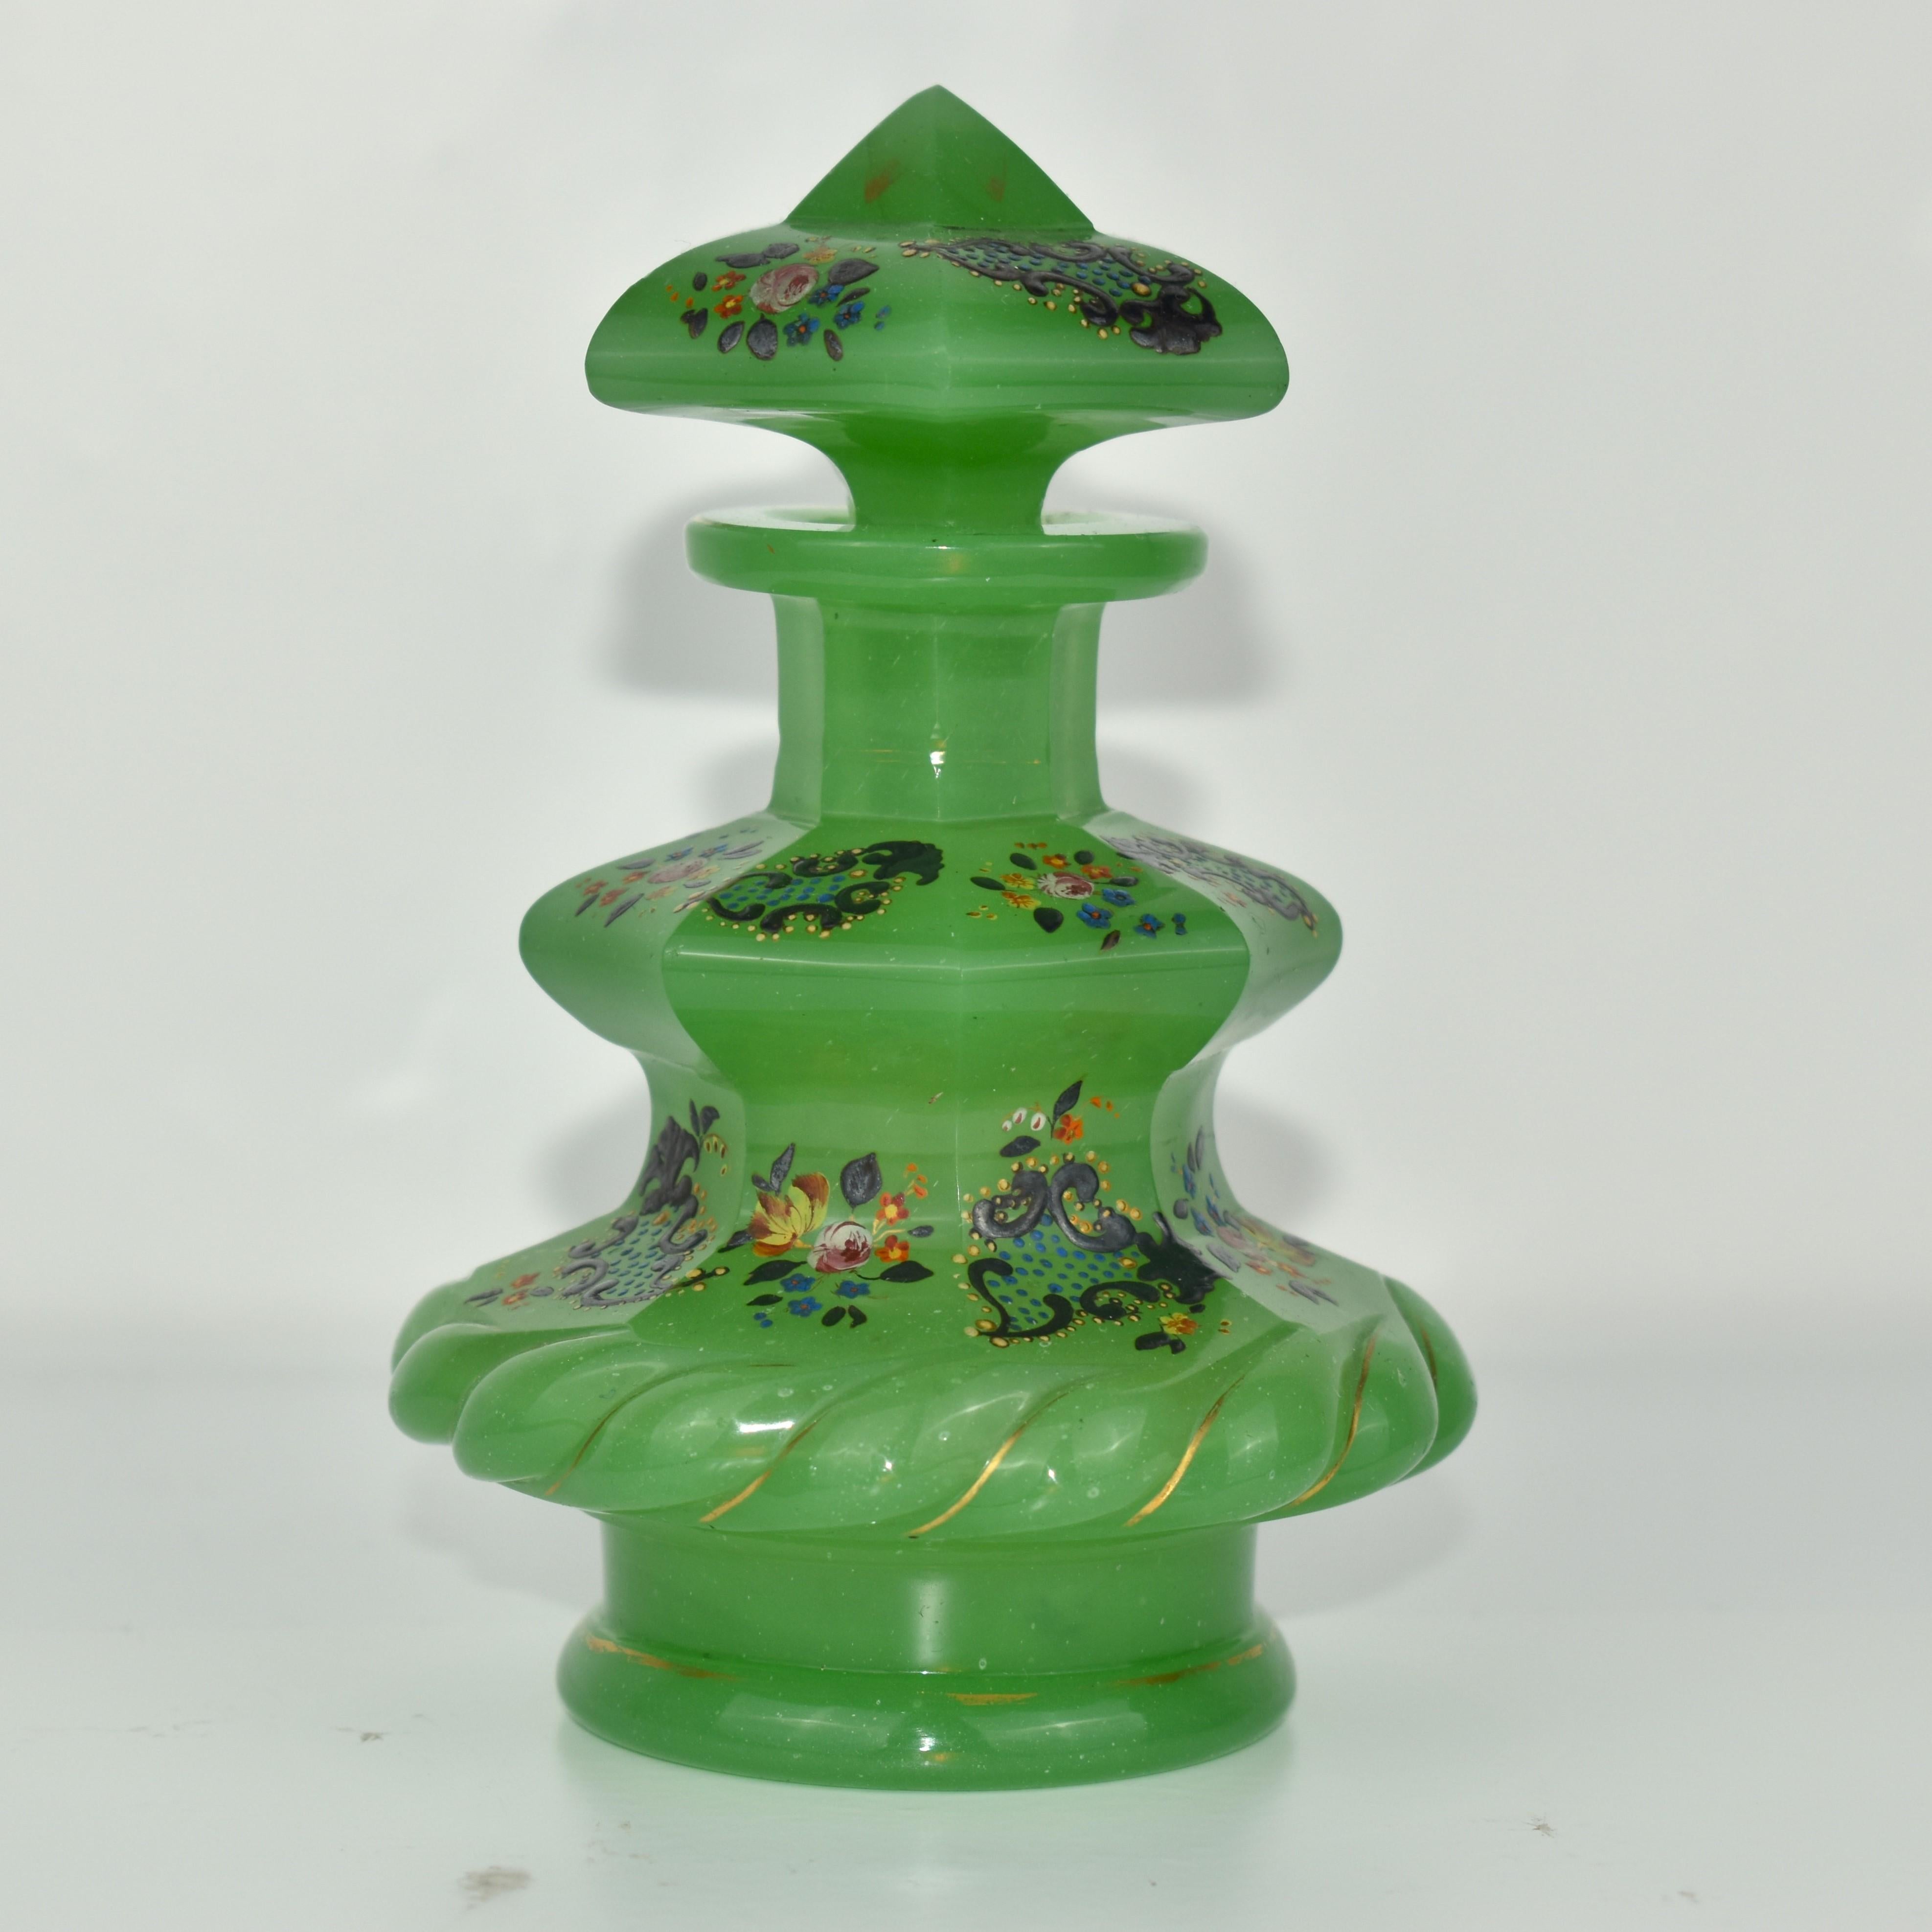 Antique Bohemian Opaline Glass Perfume Bottle and Stopper From the Biedermeier Era

Green Uranium Opaline Alabaster Glass

Beautifully Cut and Decorated with Colorful Enamel Hand-Painting

Bohemia, 19th Century.